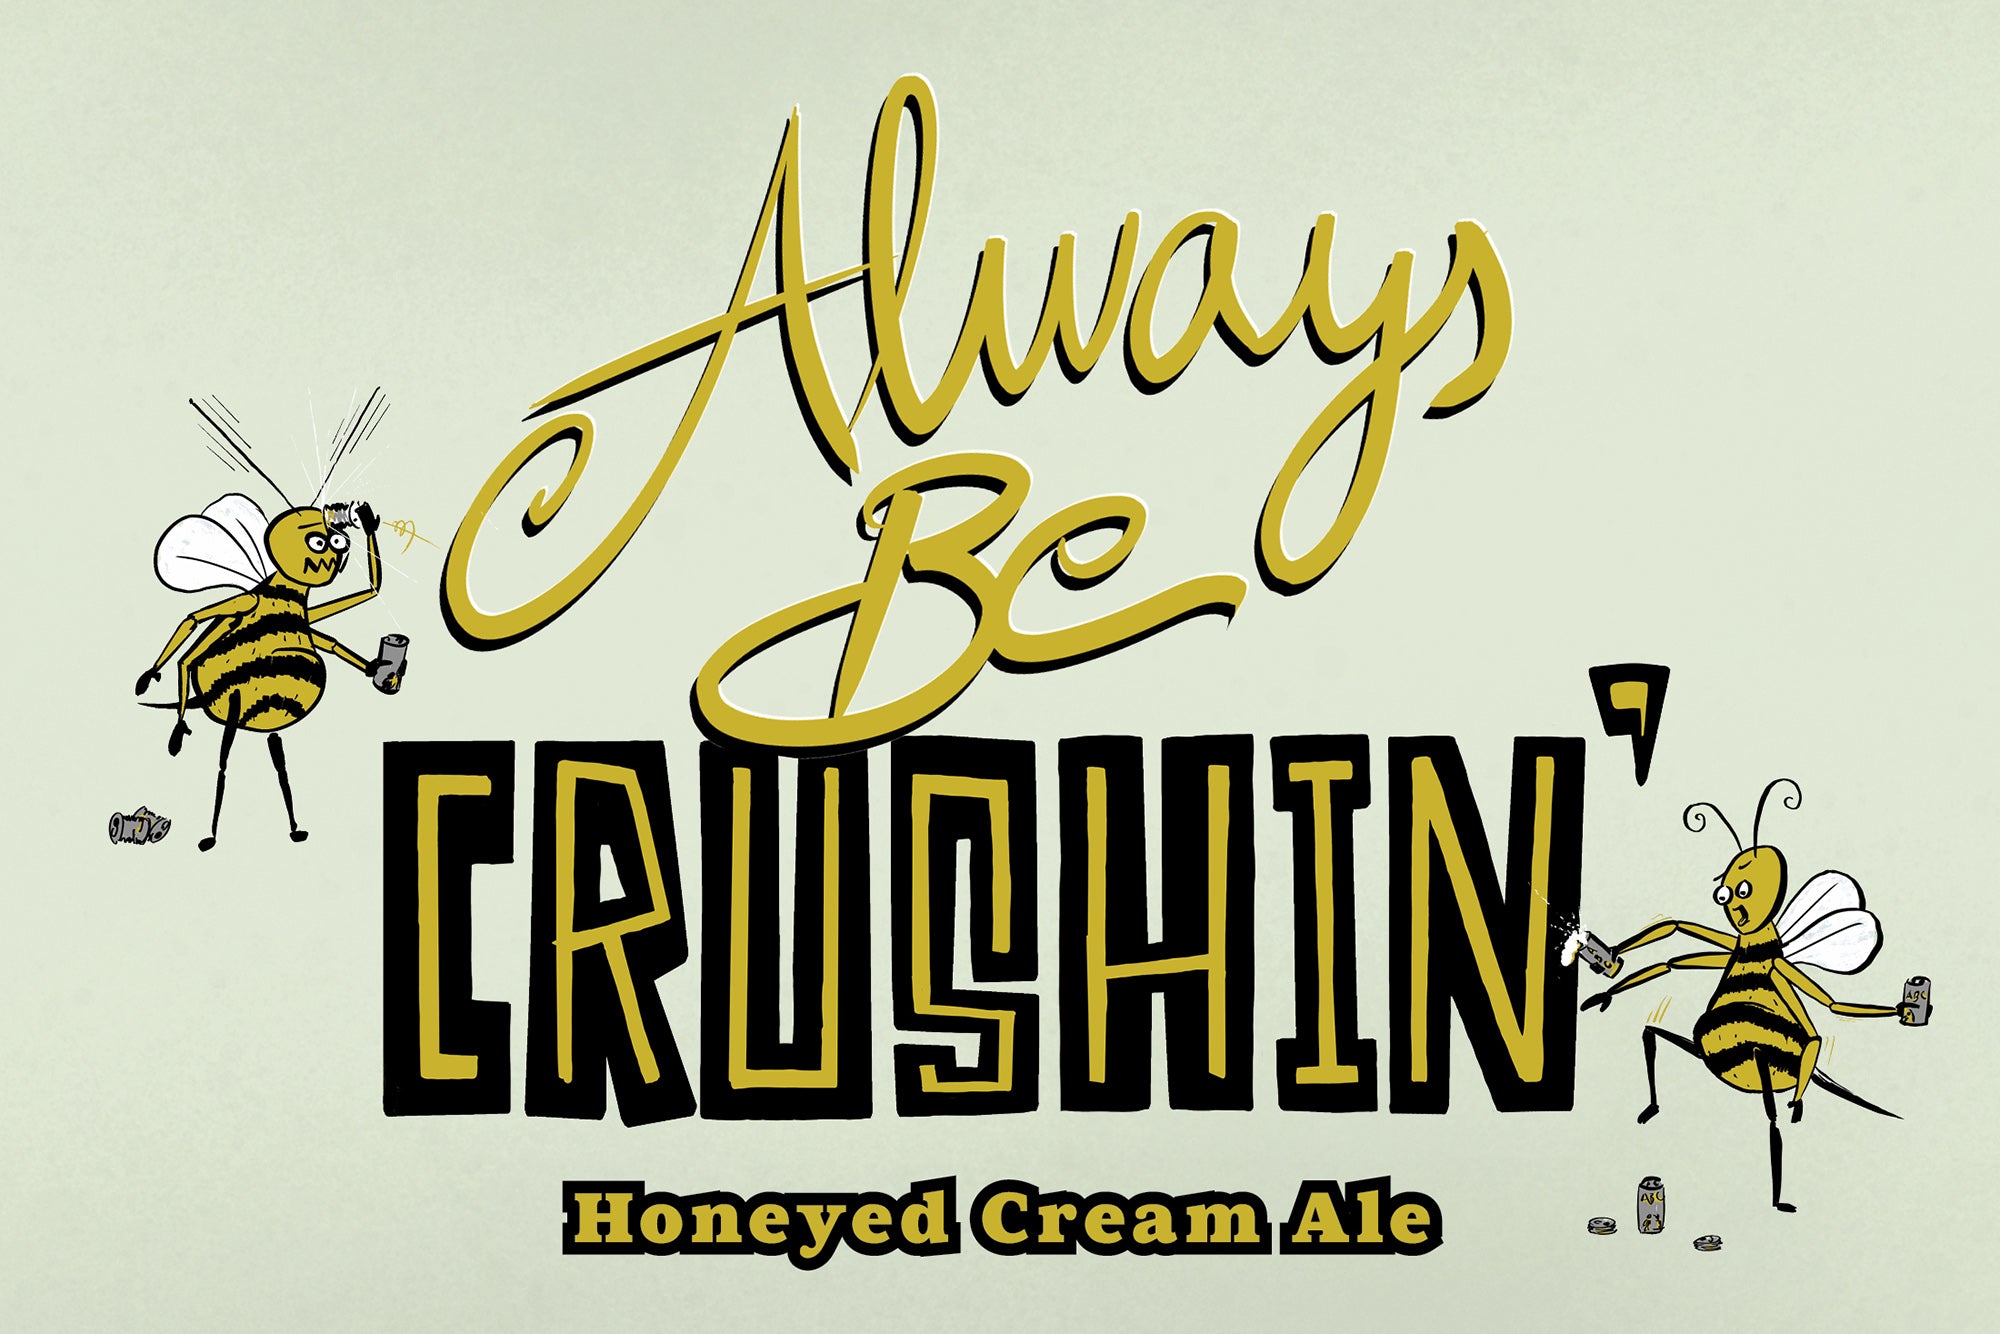 We Made Beer with Honey! Collab with Highline Brewing & ABC Bees